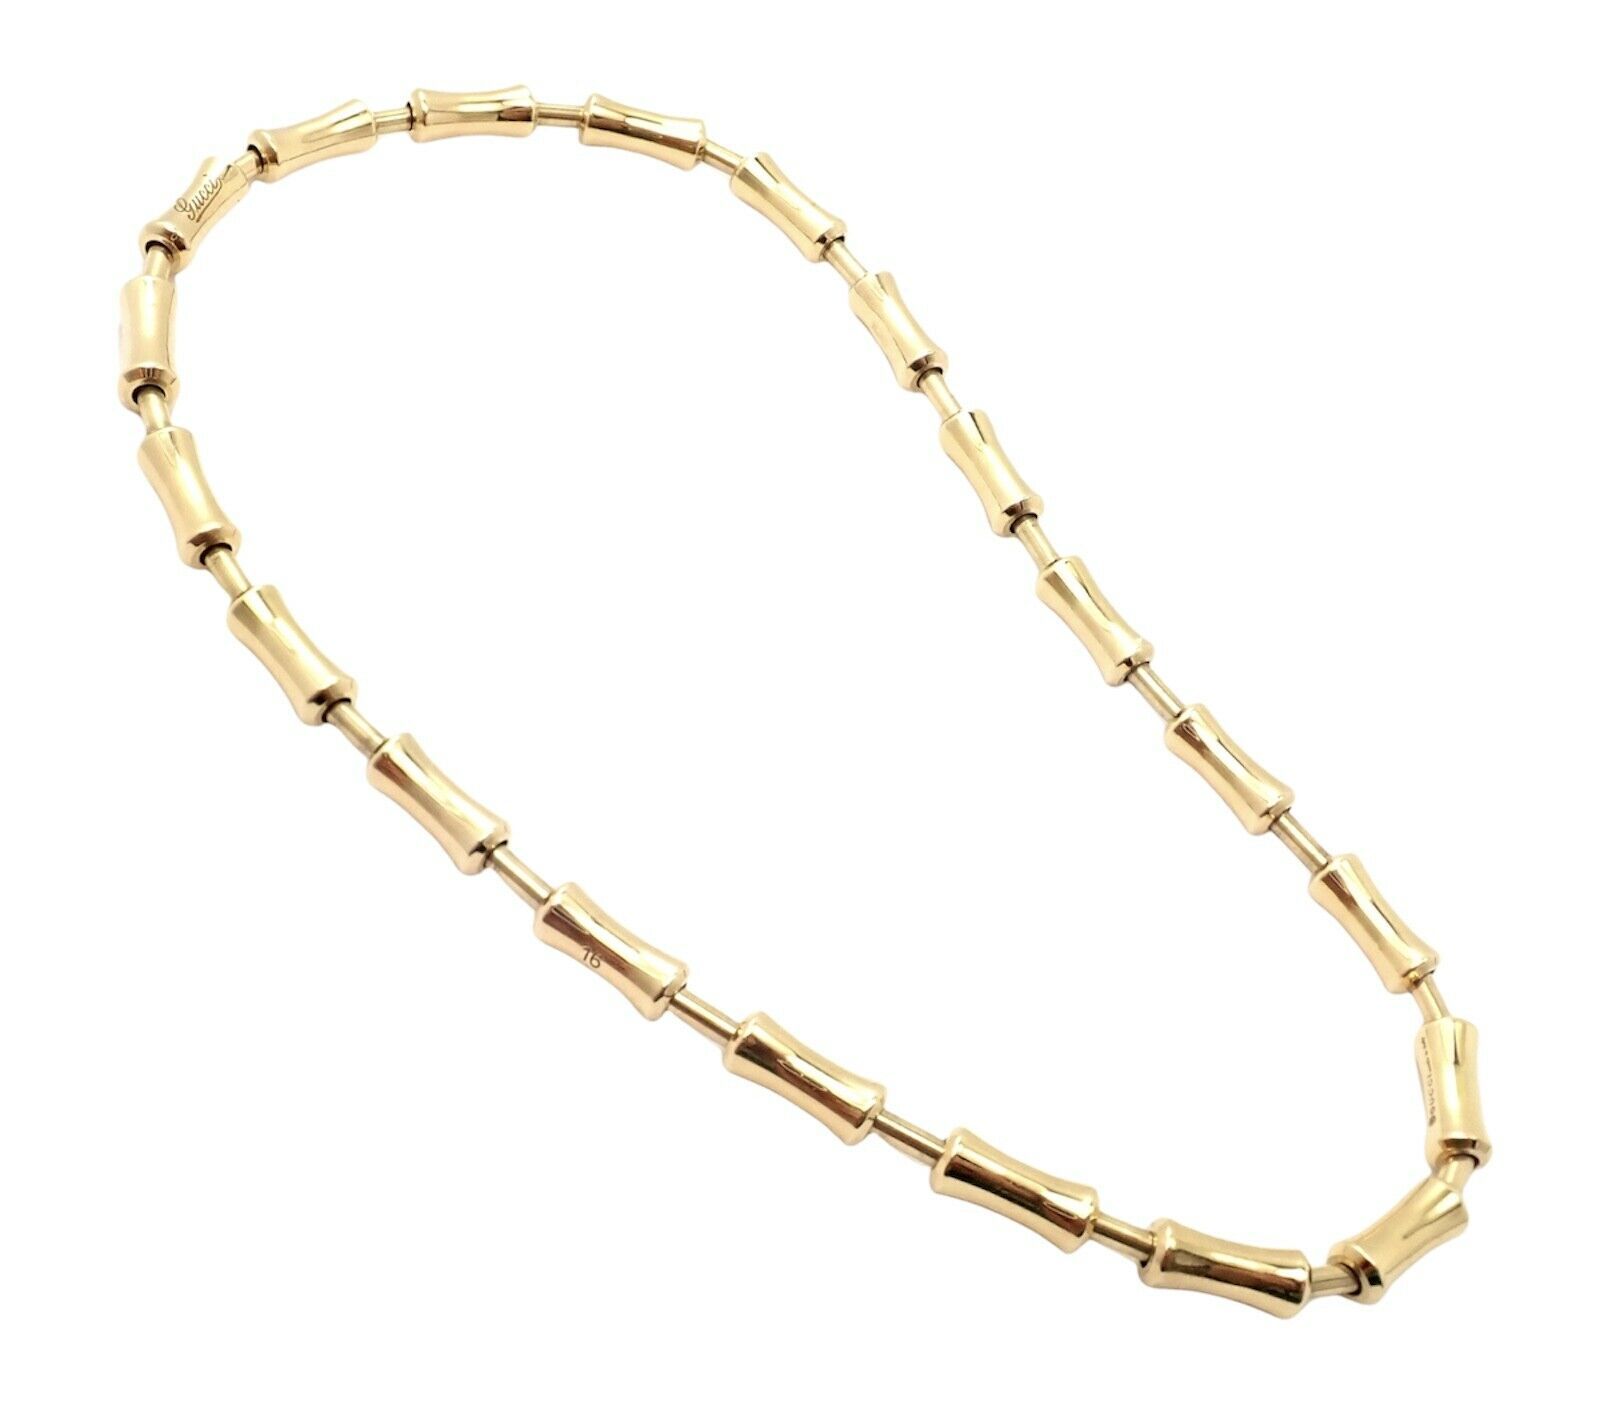 Rare! Authentic Gucci 18k Yellow Gold Bamboo Bracelet - $3,000.00